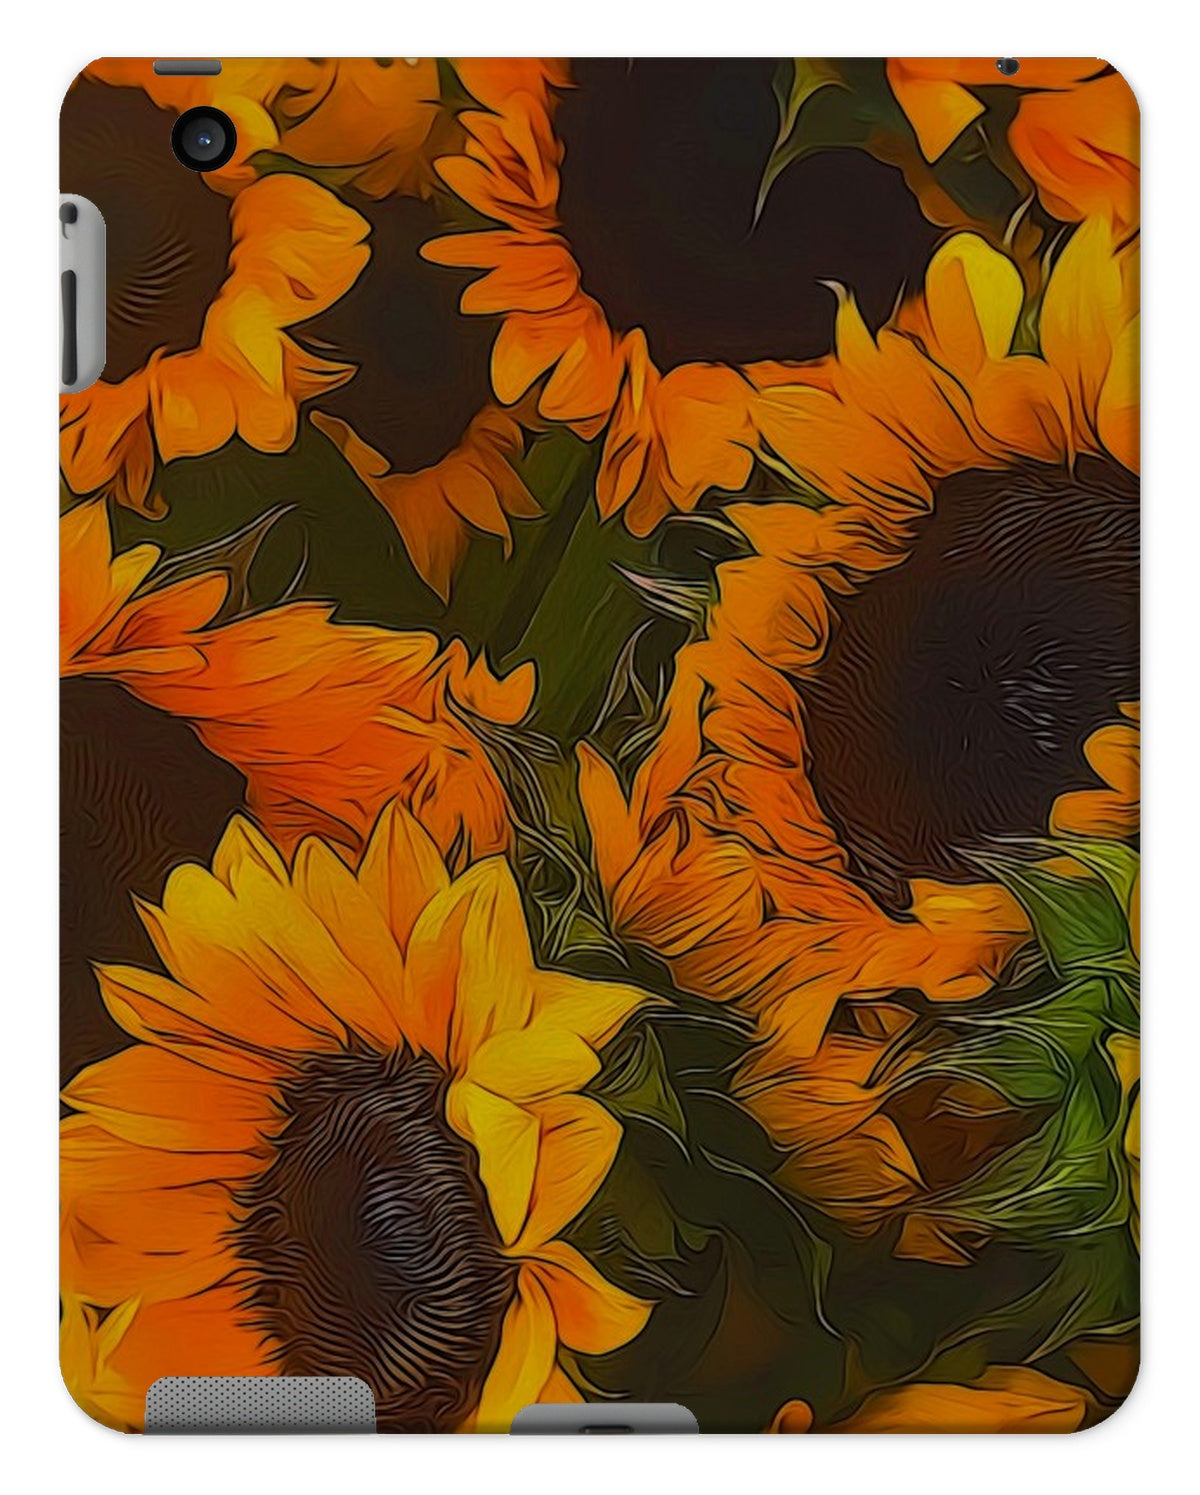 Sunflowers Tablet Cases